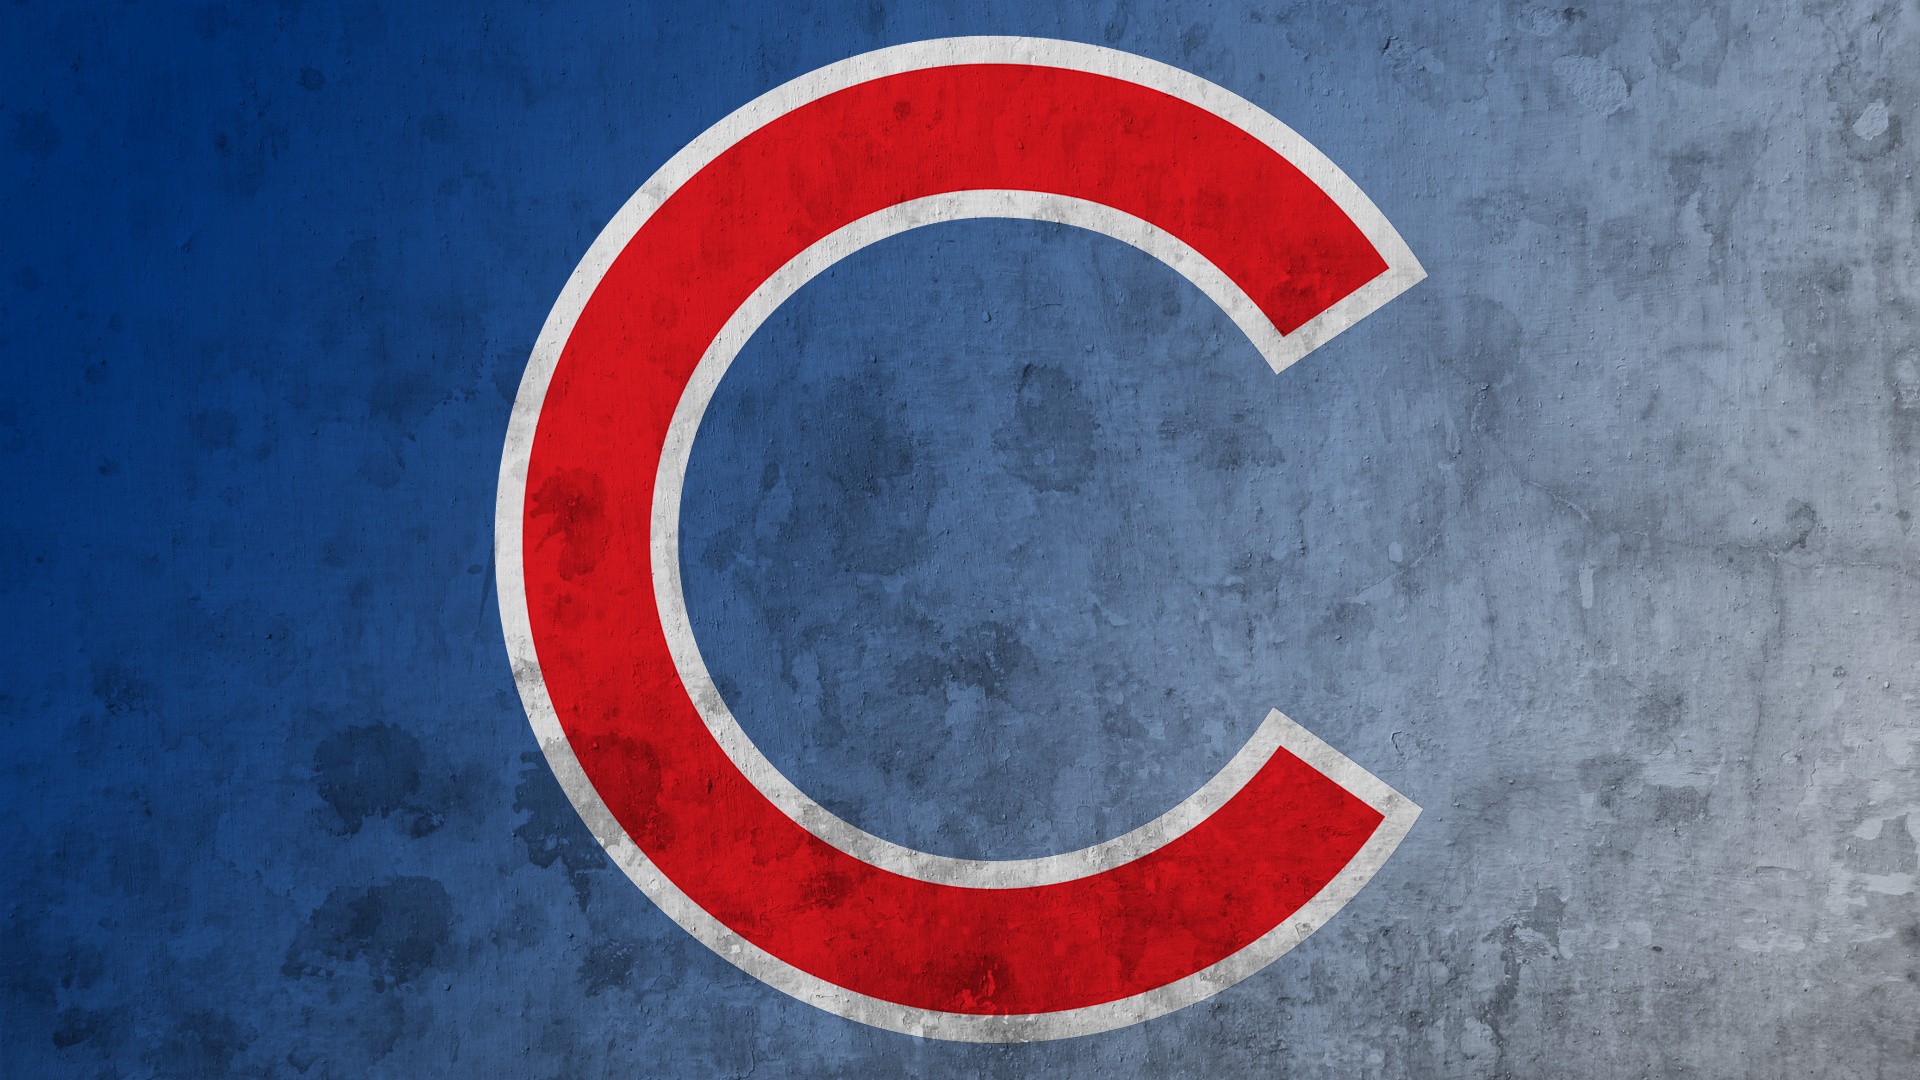 Wallpapers HD Chicago Cubs MLB With high-resolution 1920X1080 pixel. You can use this wallpaper for Mac Desktop Wallpaper, Laptop Screensavers, Android Wallpapers, Tablet or iPhone Home Screen and another mobile phone device